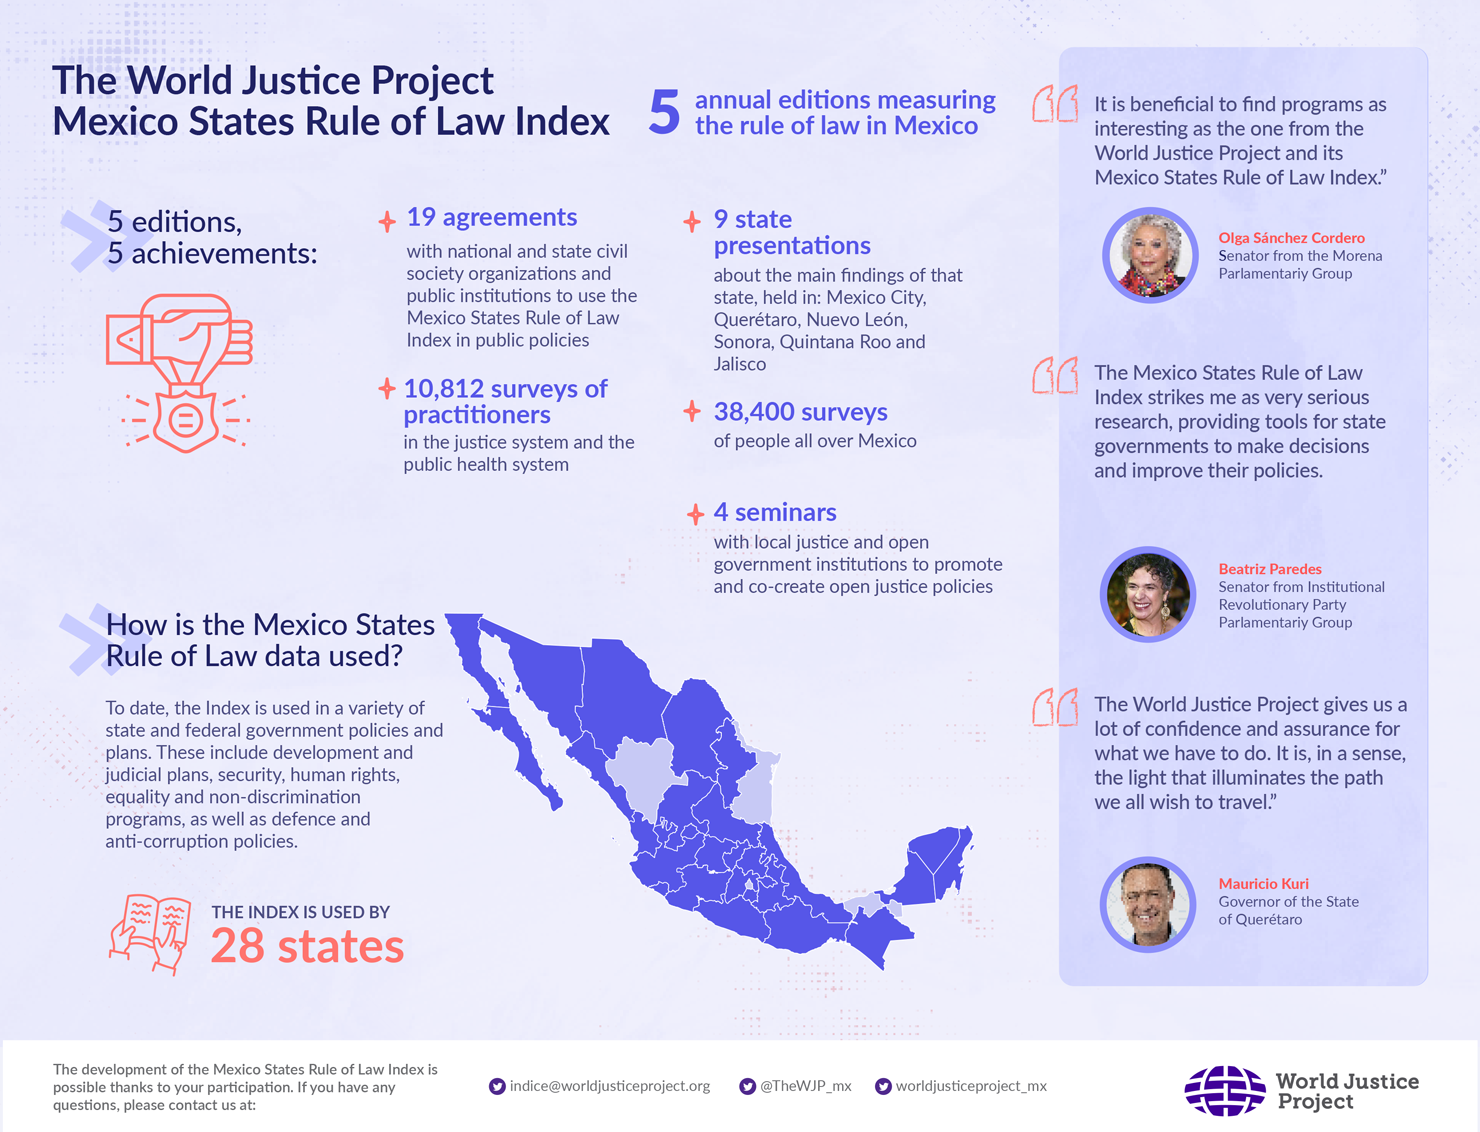 Summary of how WJP Mexico States Rule of Law Index has been used over five editions 